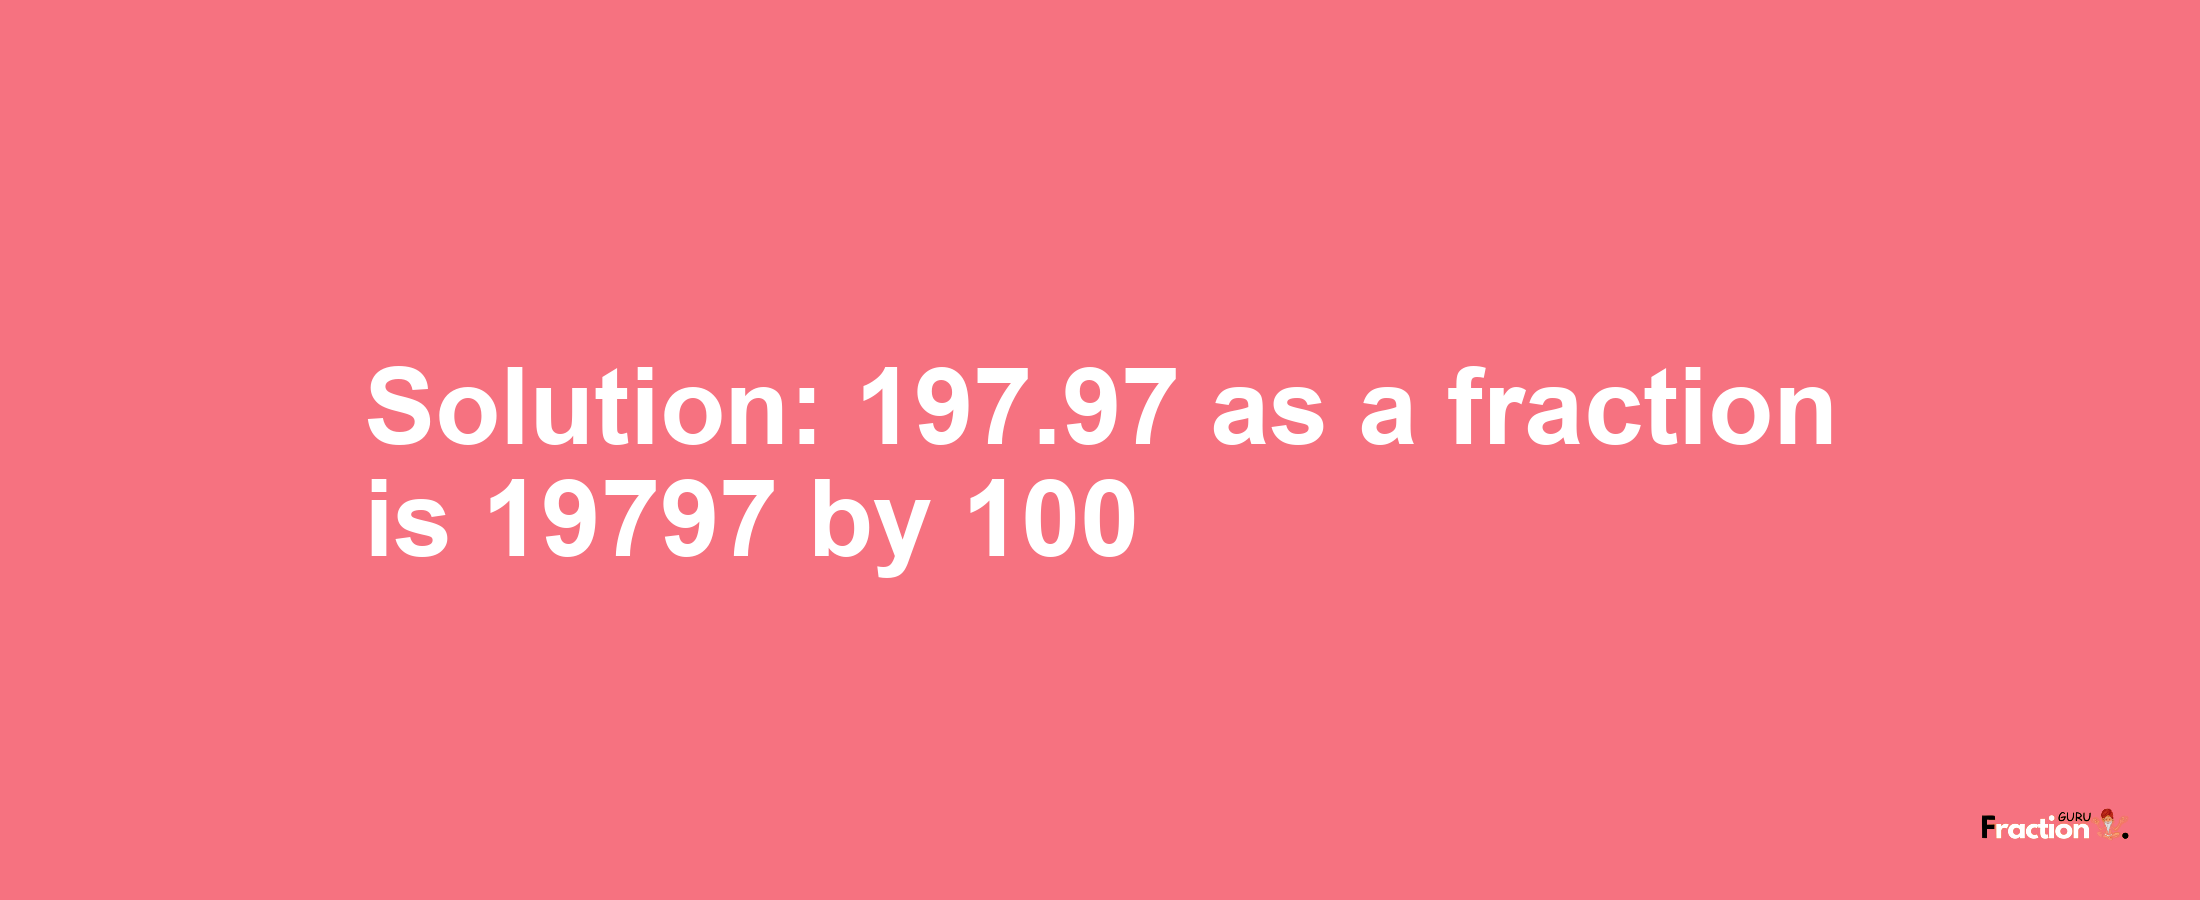 Solution:197.97 as a fraction is 19797/100